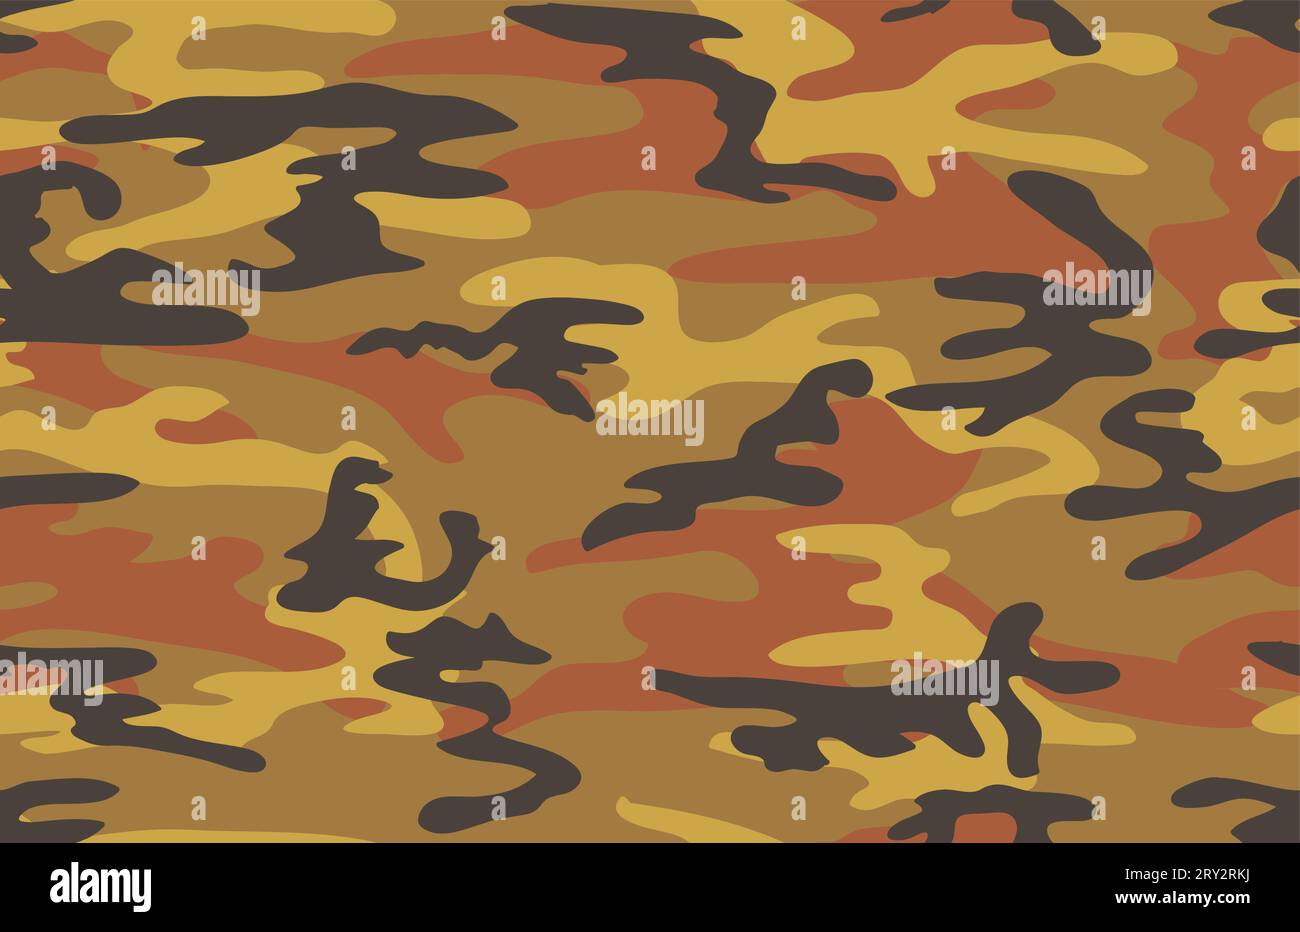 Vector camouflage seamless background. Autumn color scheme. Copper brown, brick red, ocher yellow and black. Stock Vector